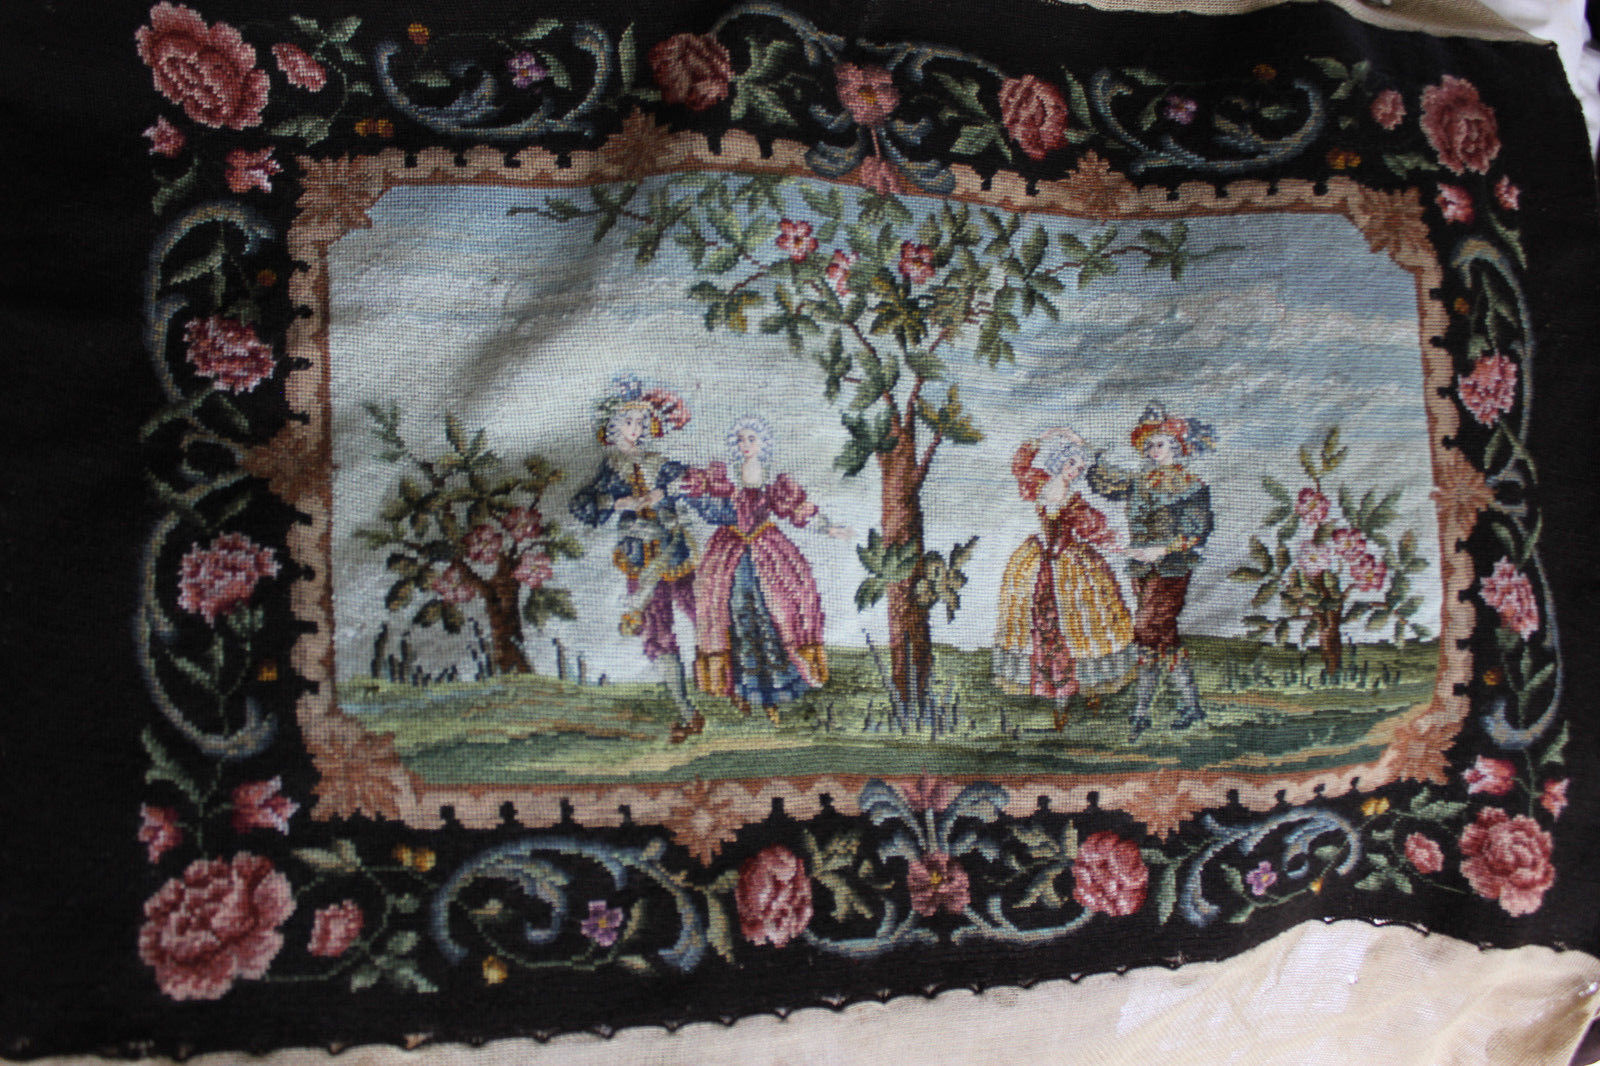 Vintage Antique French wool needlework tapestry needlepoint 19th century